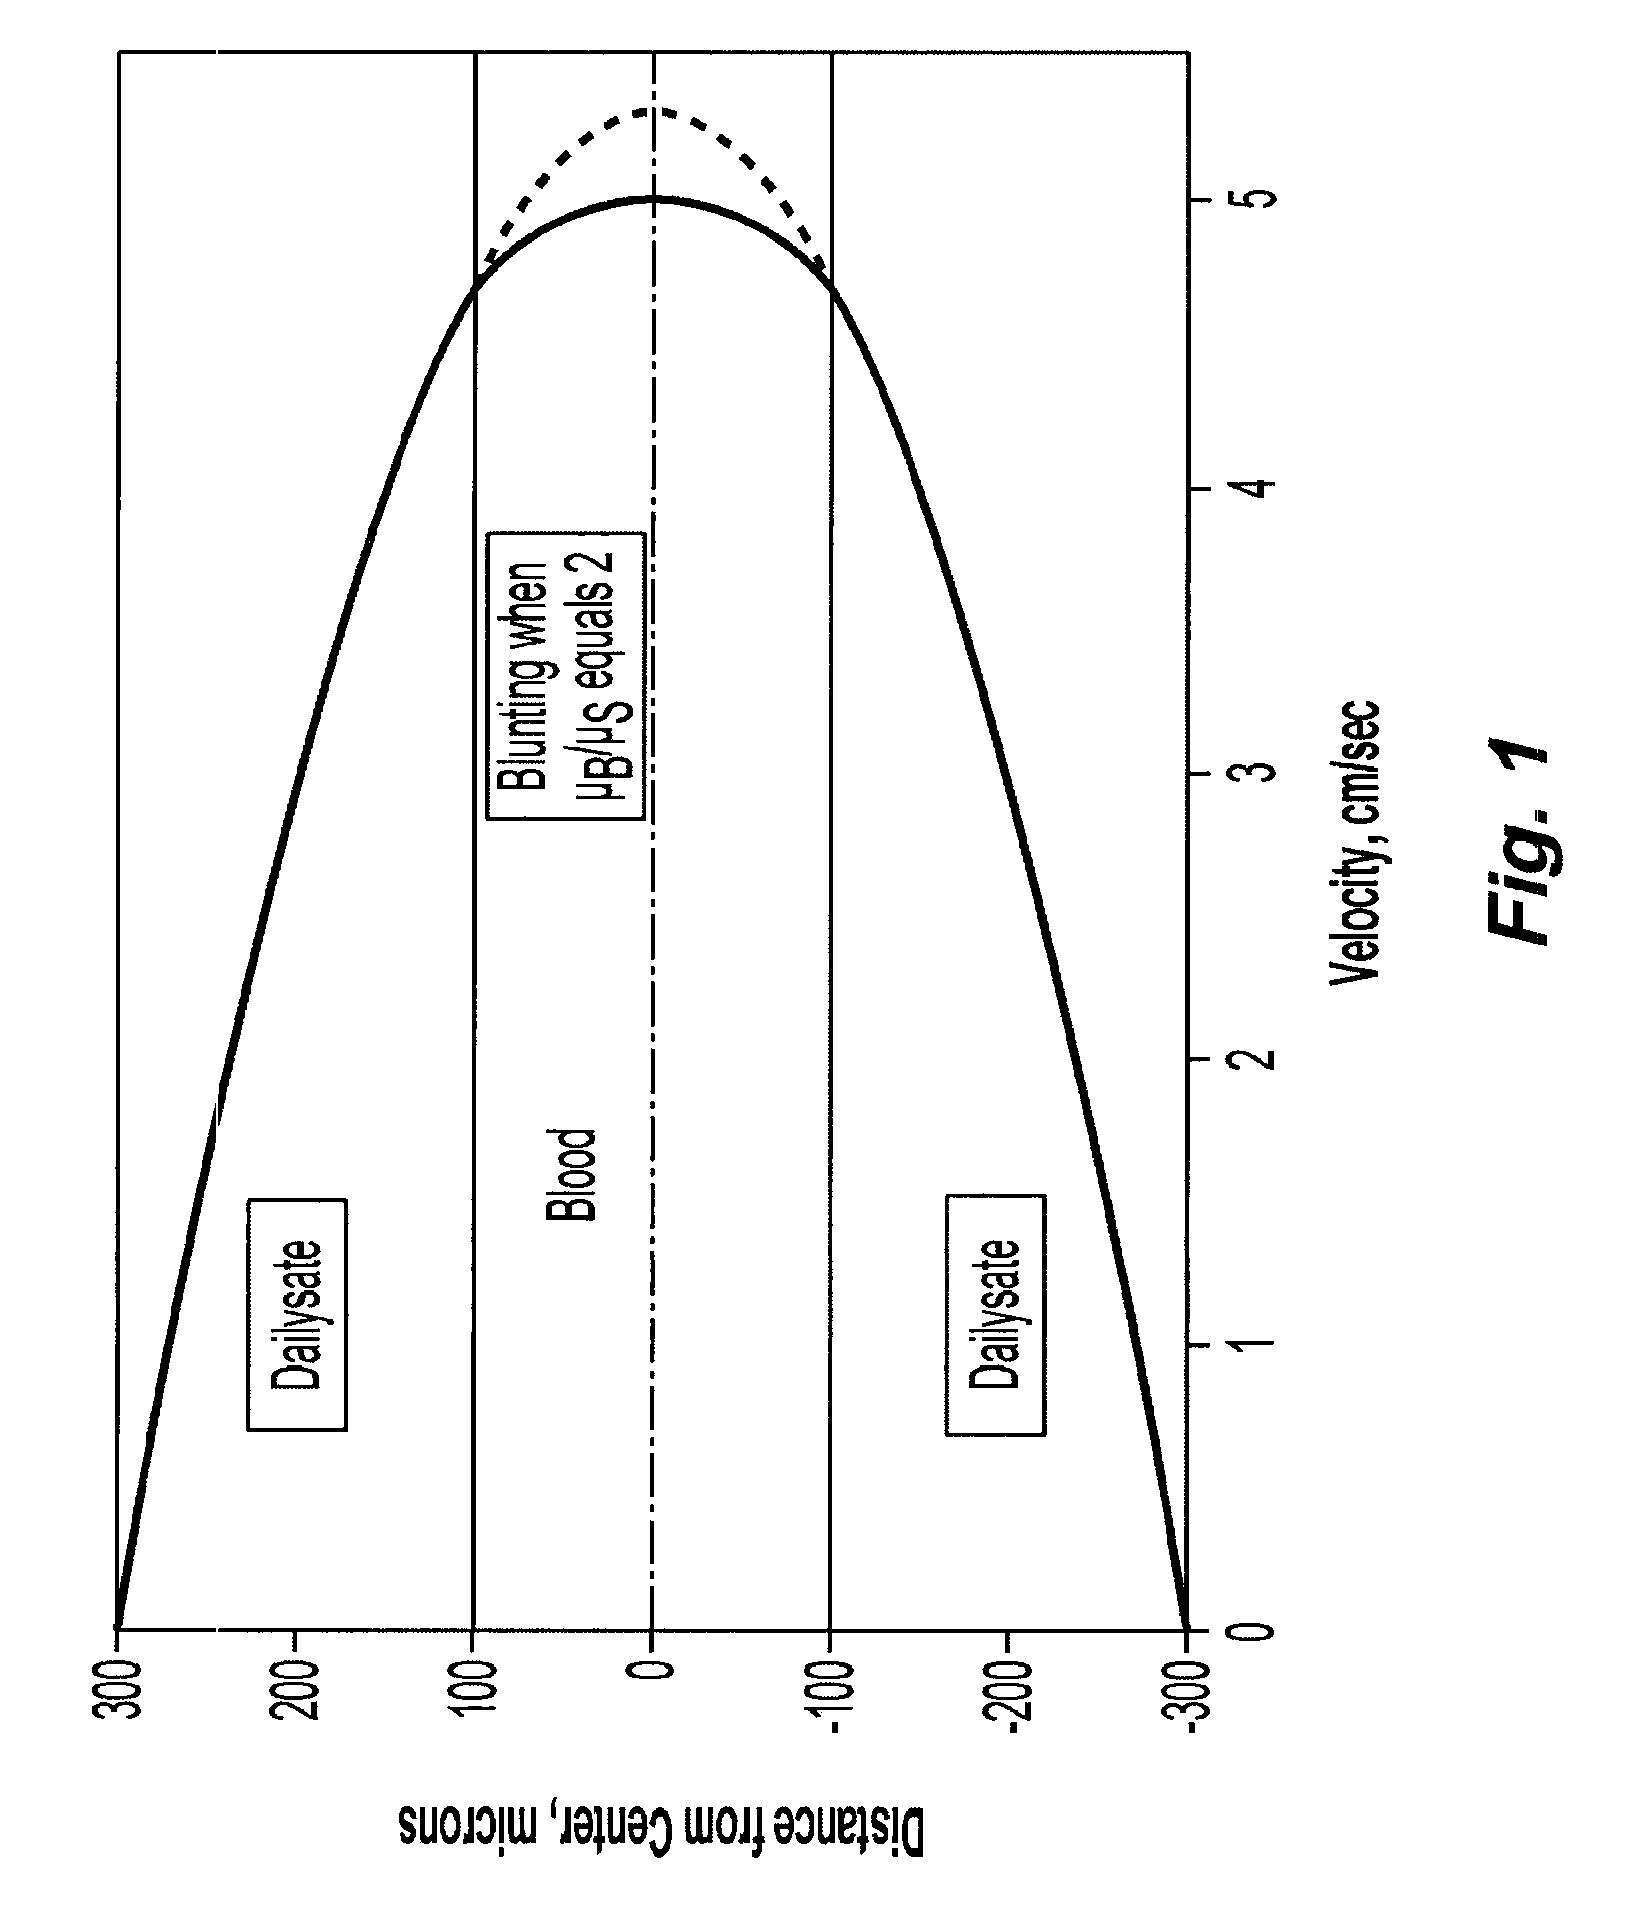 Systems and methods of blood-based therapies having a microfluidic membraneless exchange device